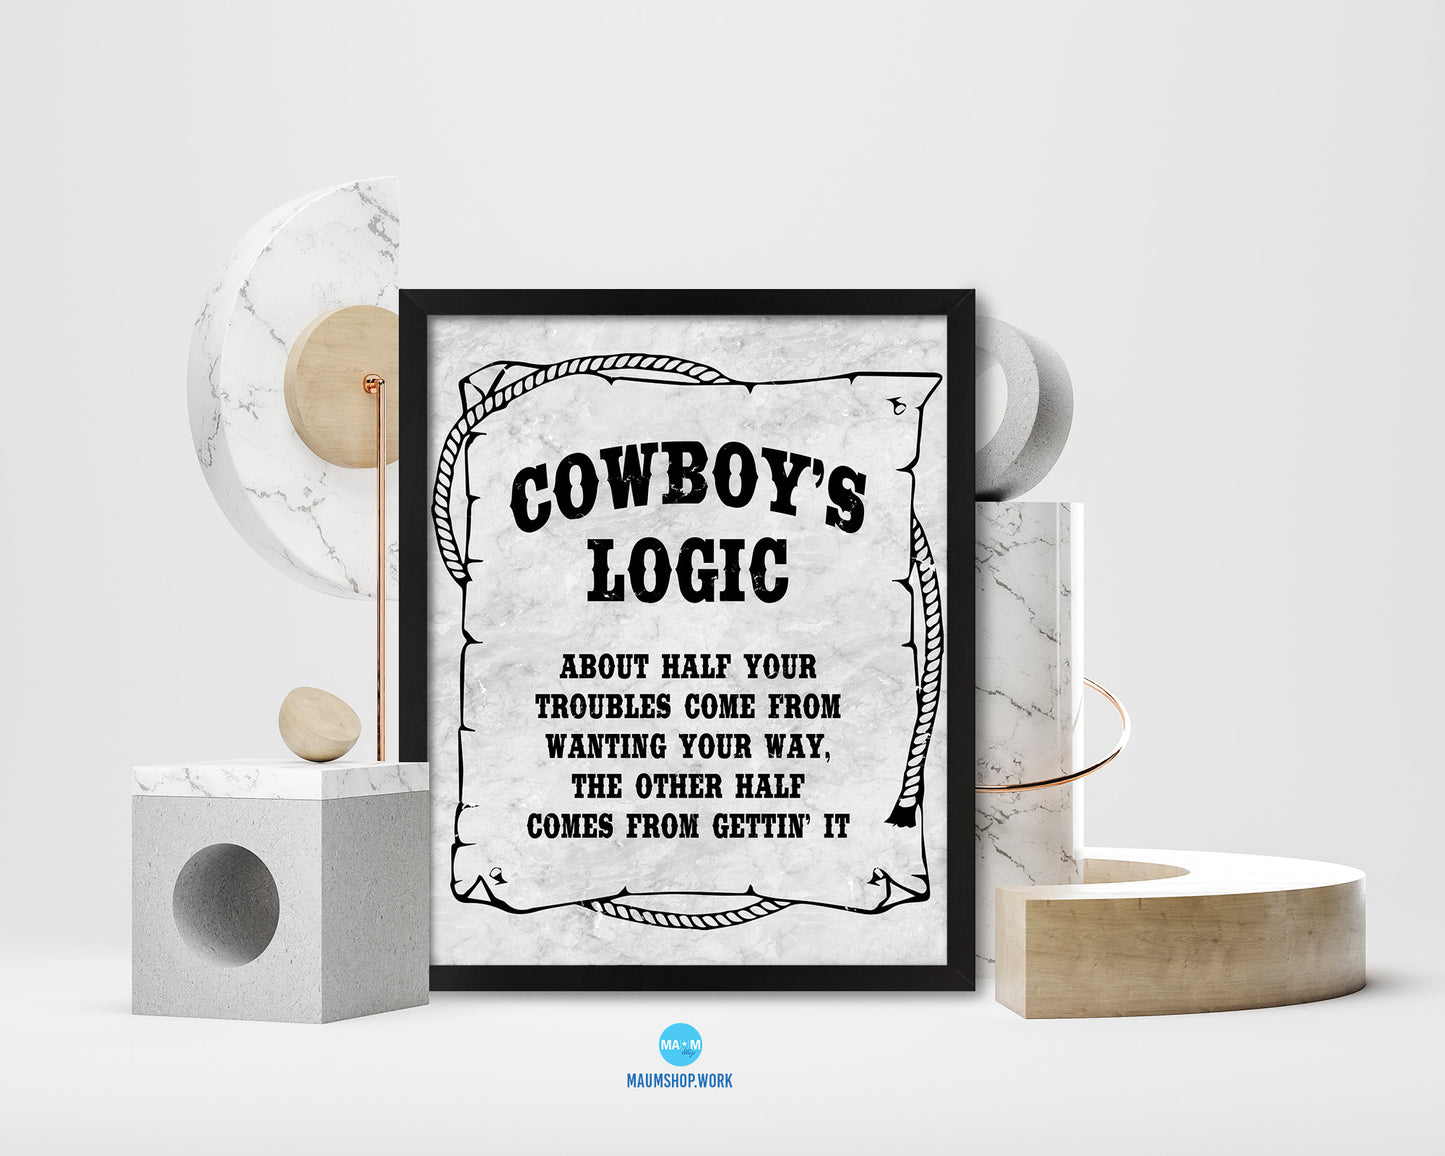 Cowboy's logic about half your troubles Western Quote Framed Print Wall Art Decor Gifts